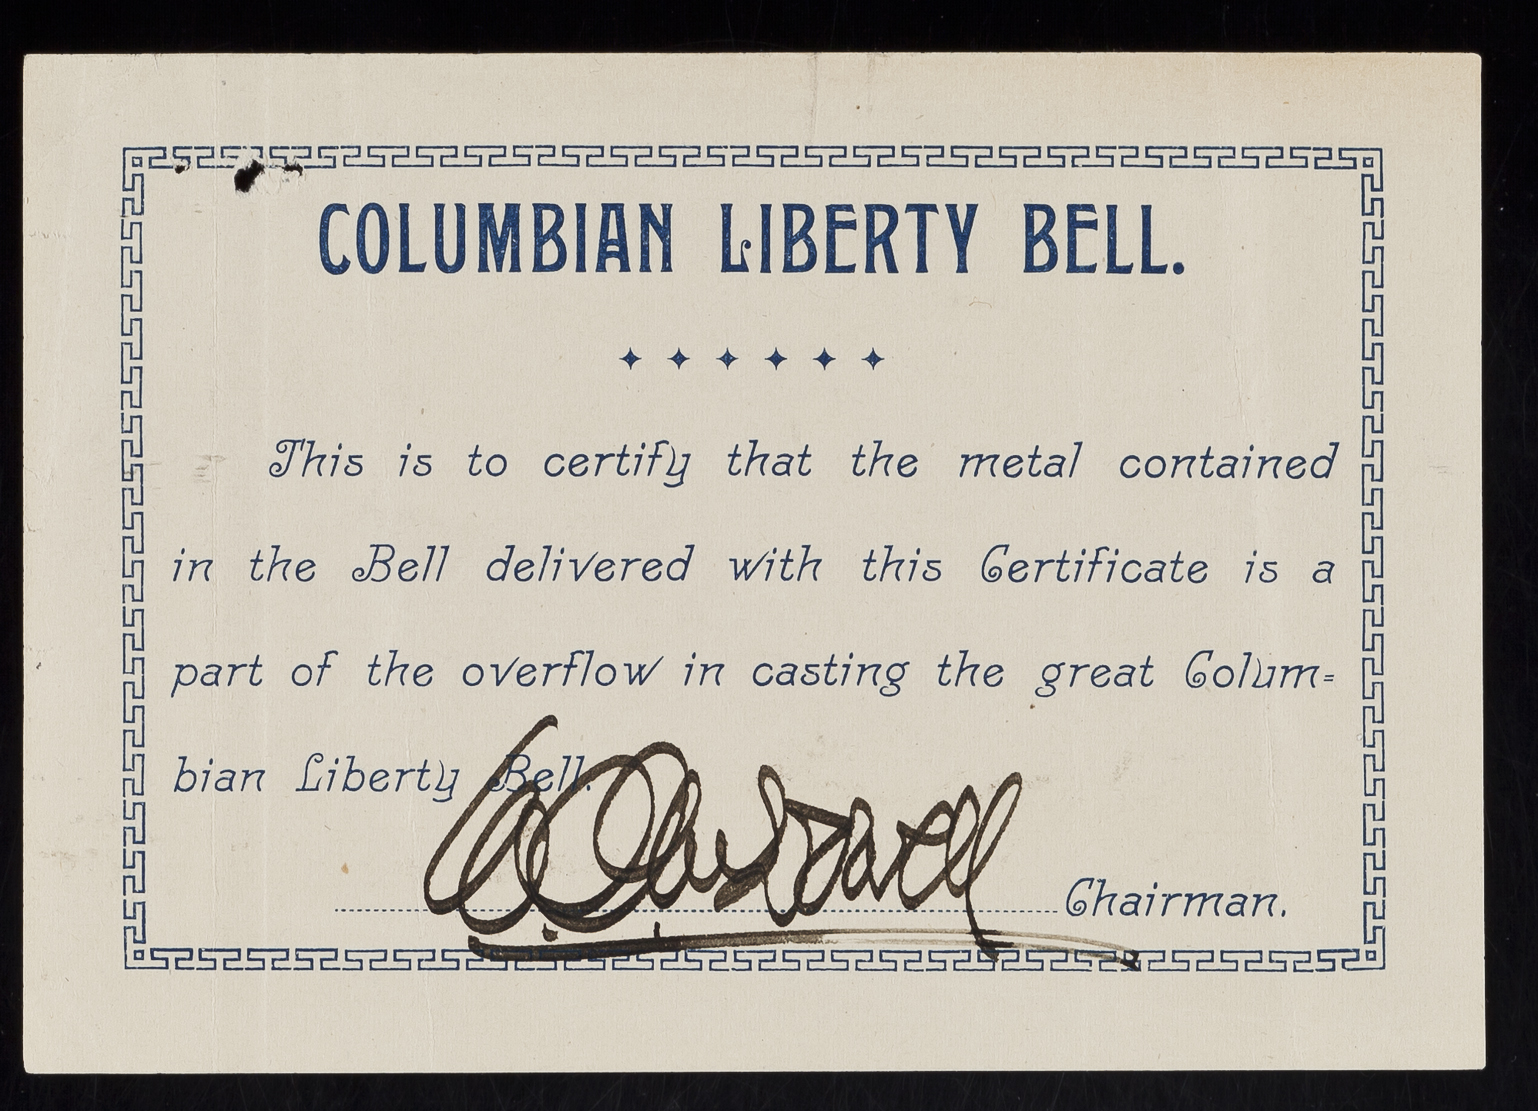 Colombian Liberty Bell certificate of authenticity